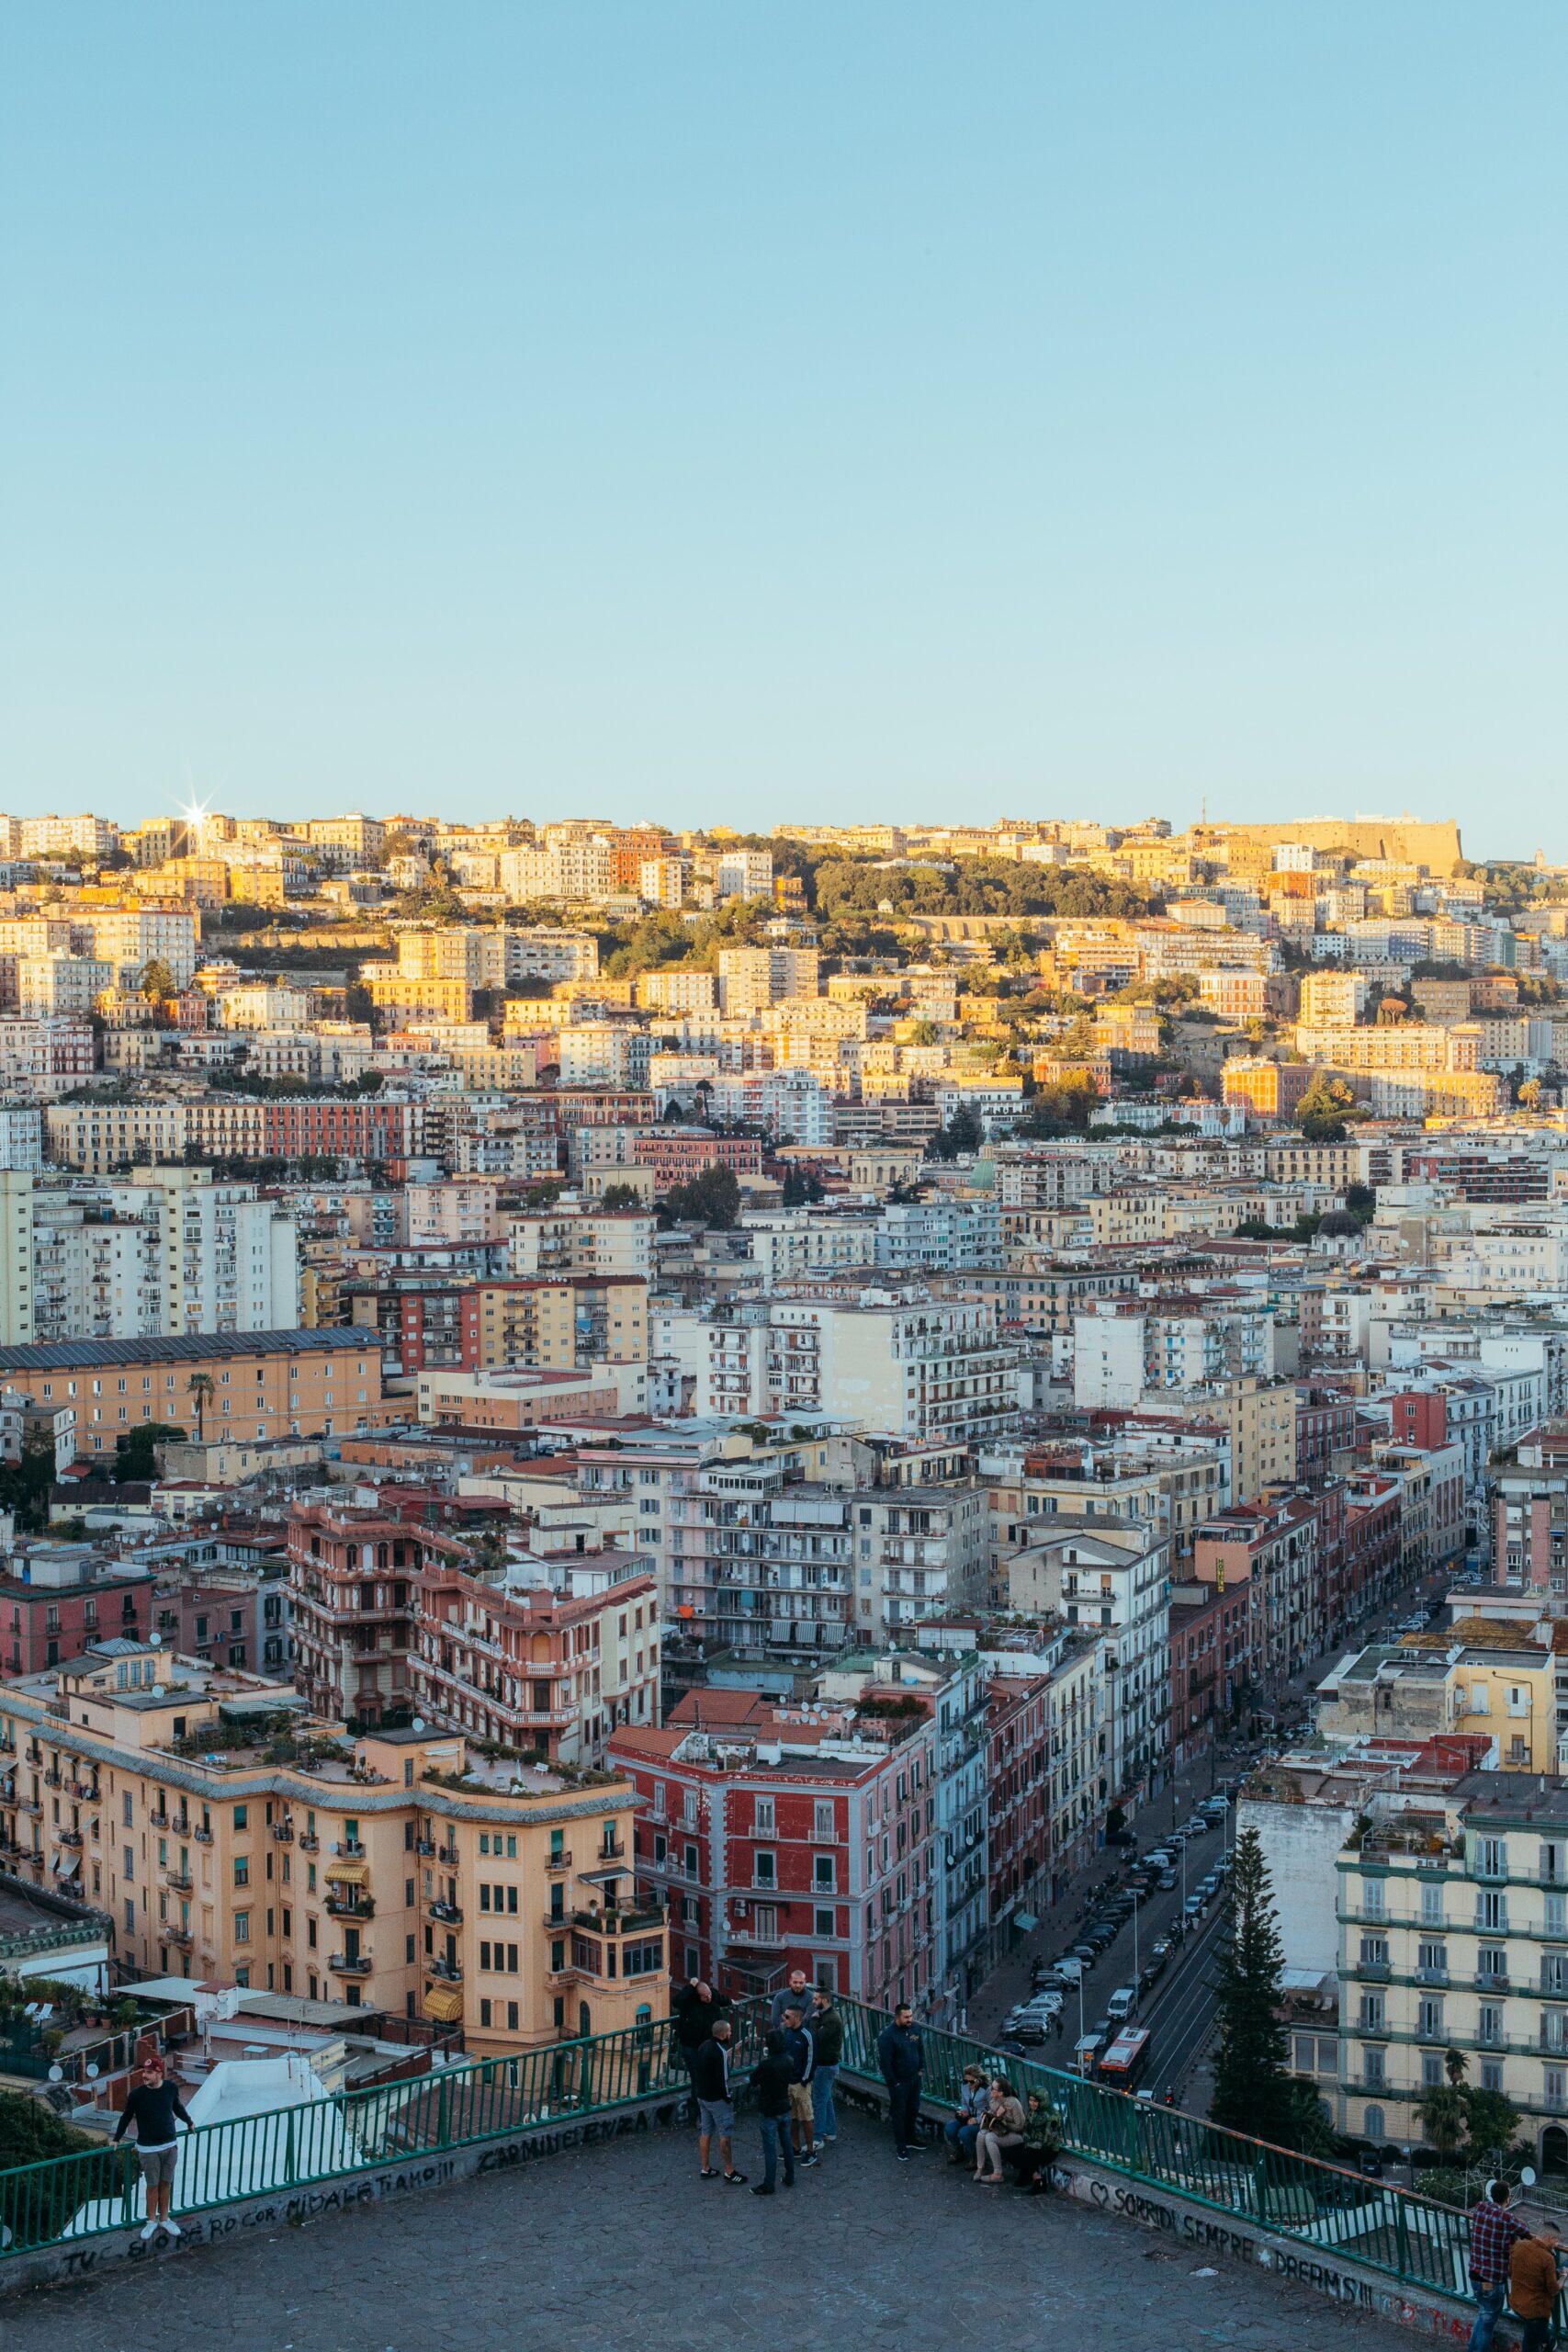 The city of Naples seen from above